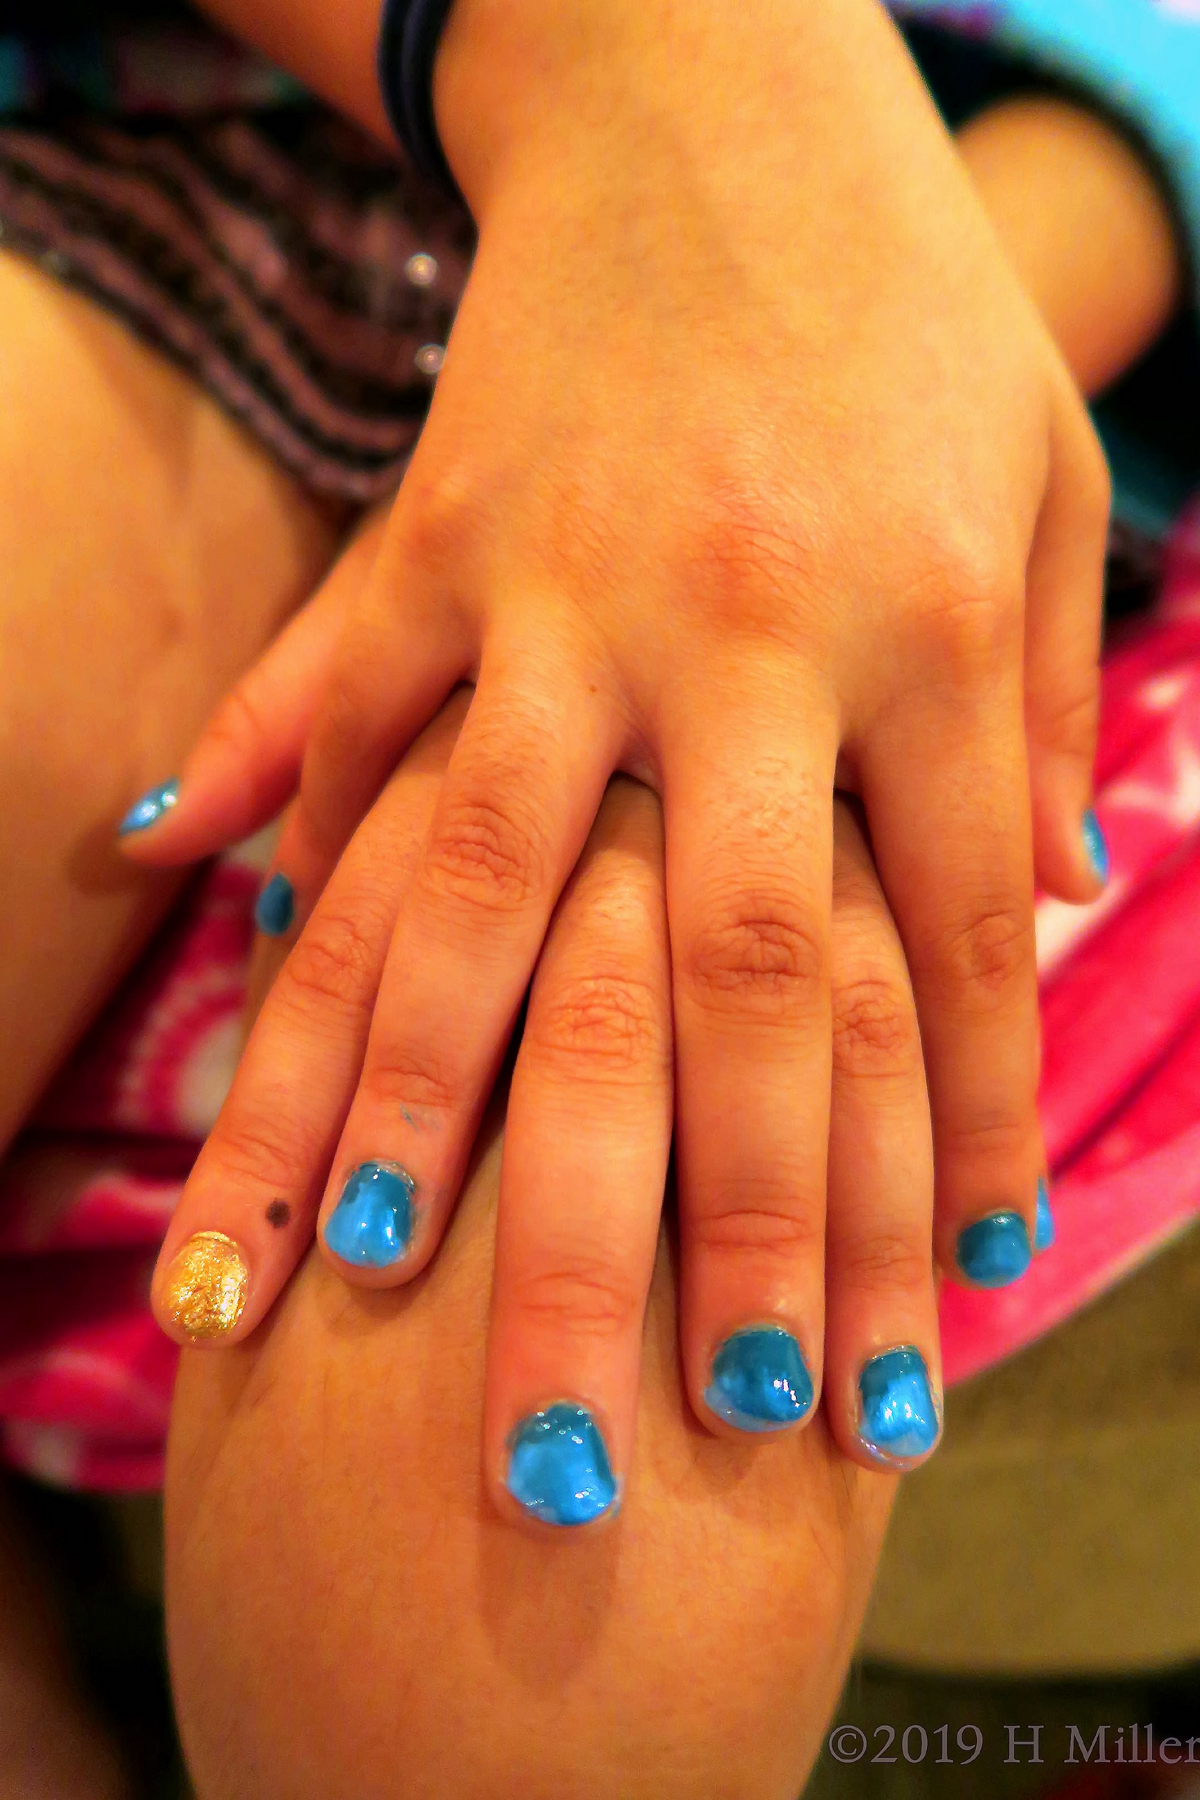 A Very Cool Ombre Nail Design With Blue And Gold Shimmer For This Kids Manicure! 